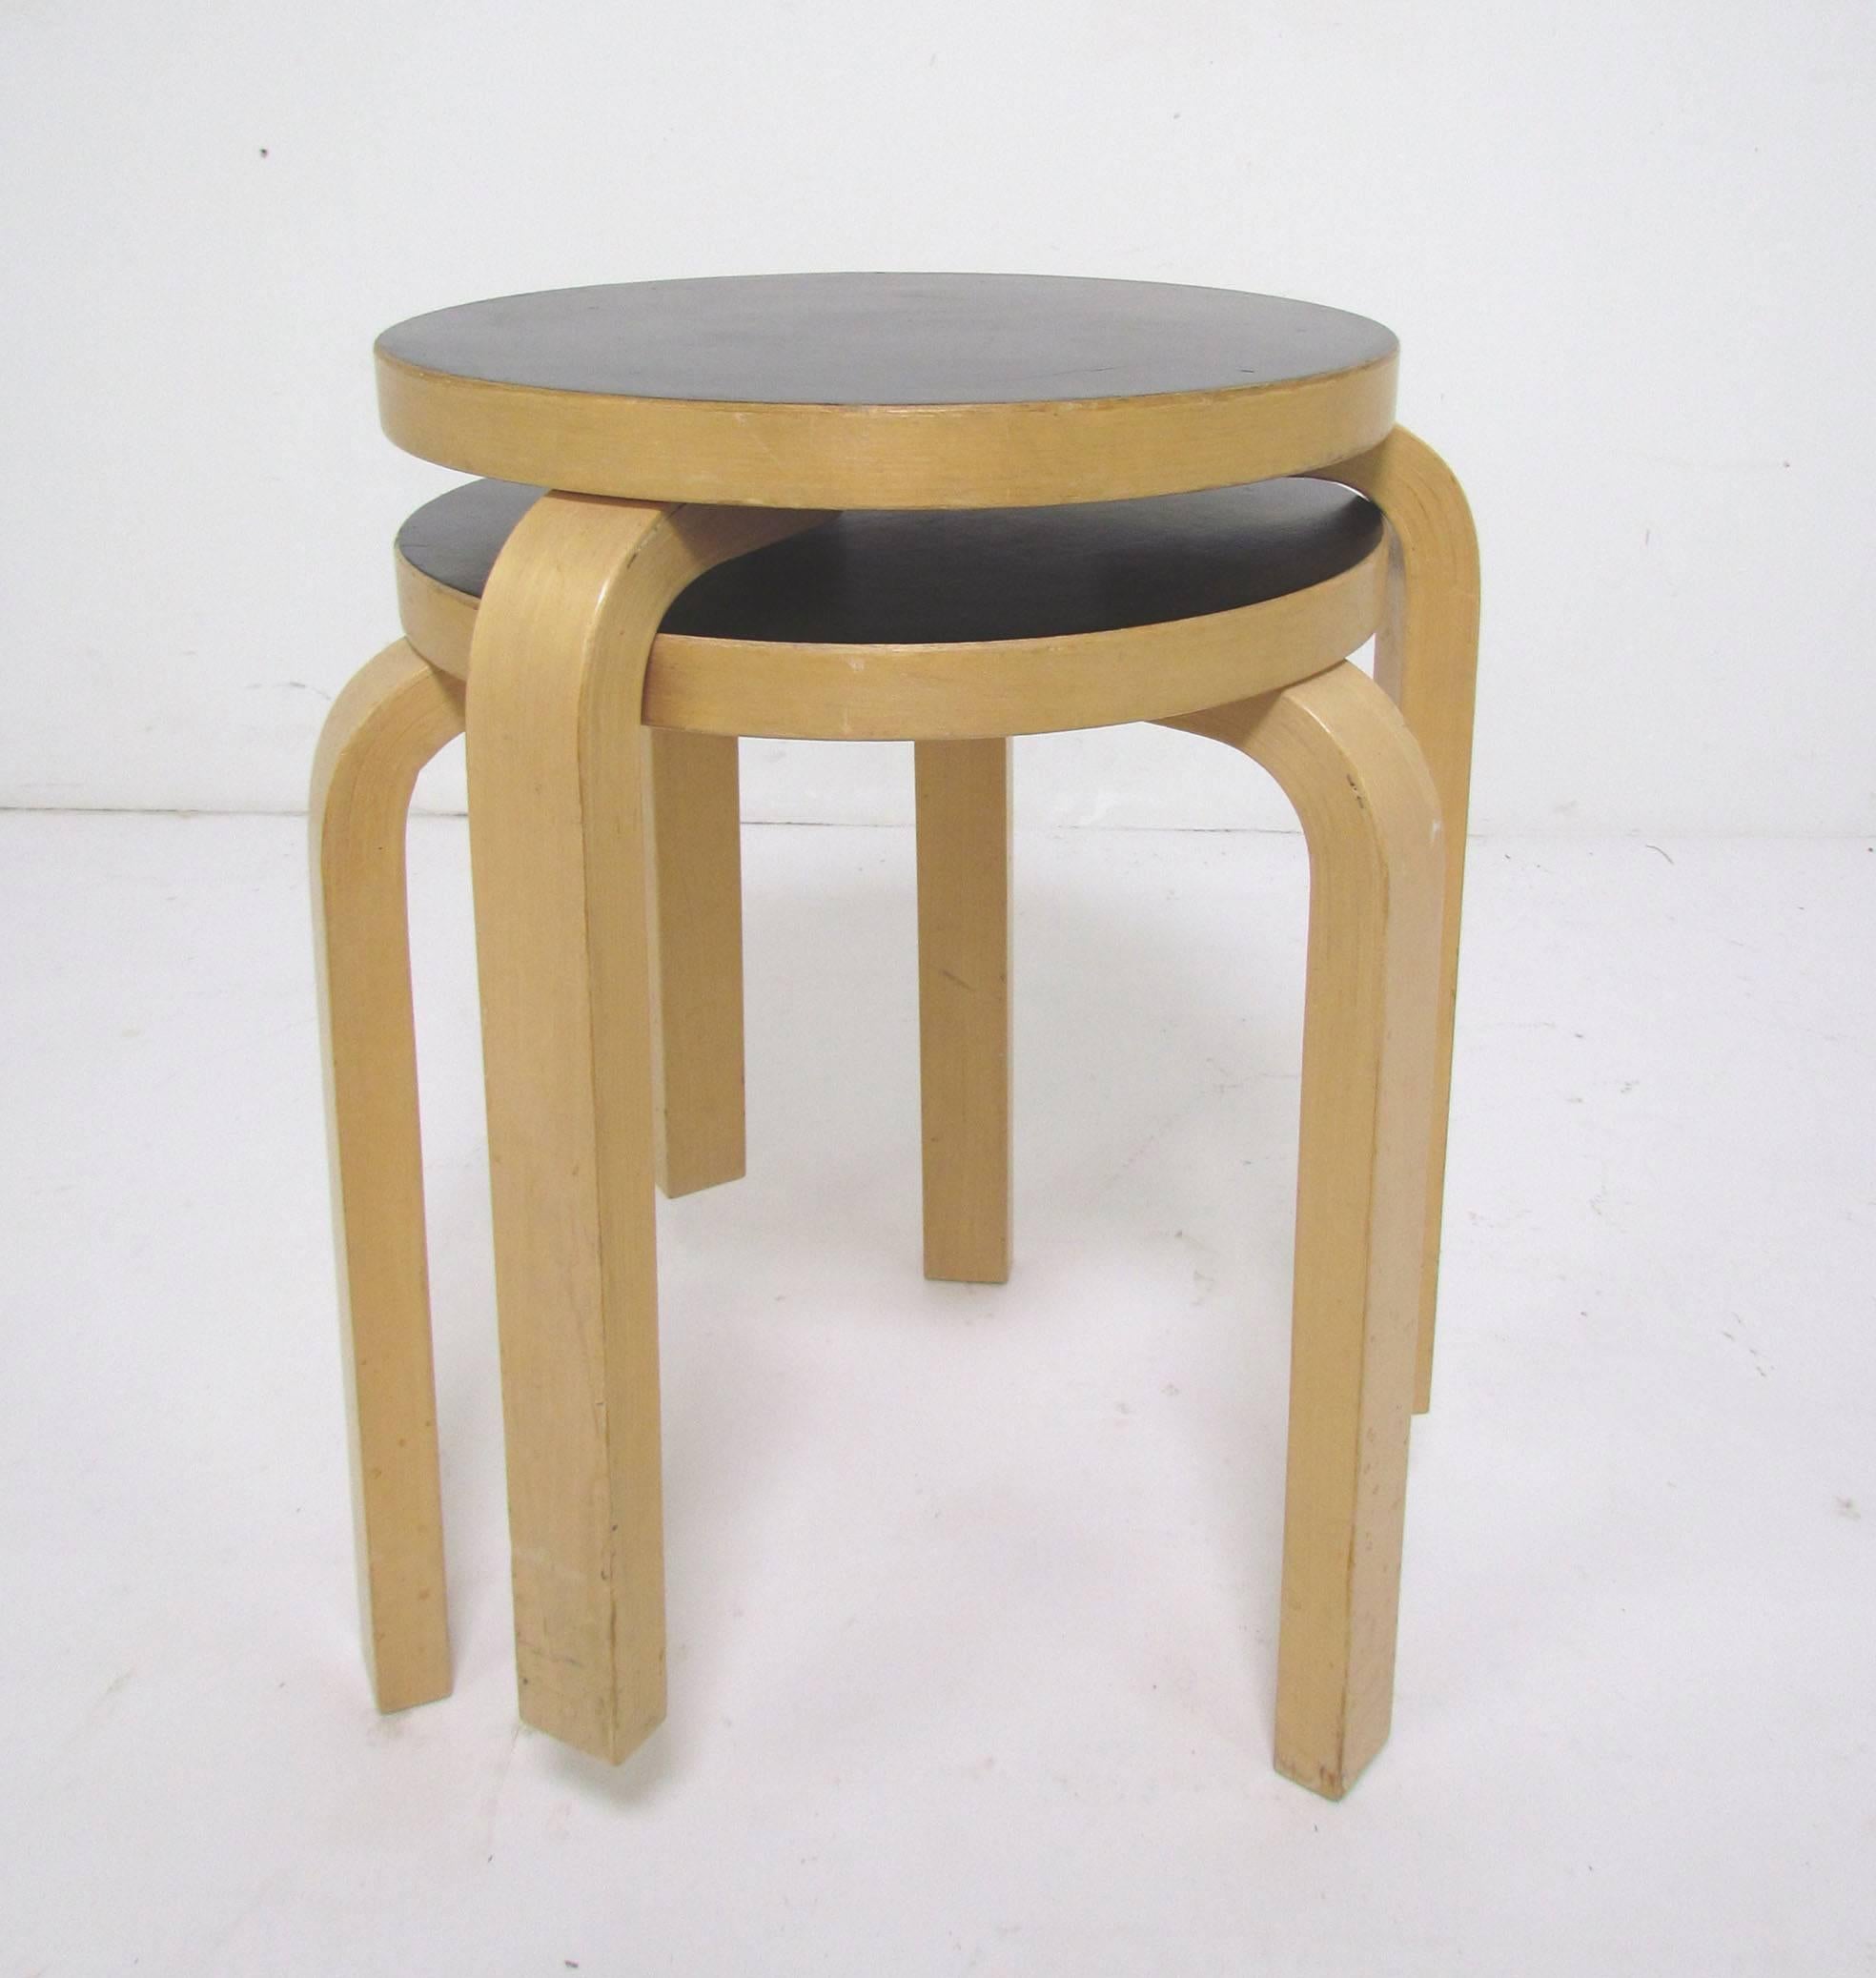 Pair of iconic three legged stacking stools in bent ply birch with inset linoleum tops, designed by Alvar Aalto in the 1930s, this pair dates to the mid-1960s.  Can also serve as occasional side tables.

Surface diameter  13.5